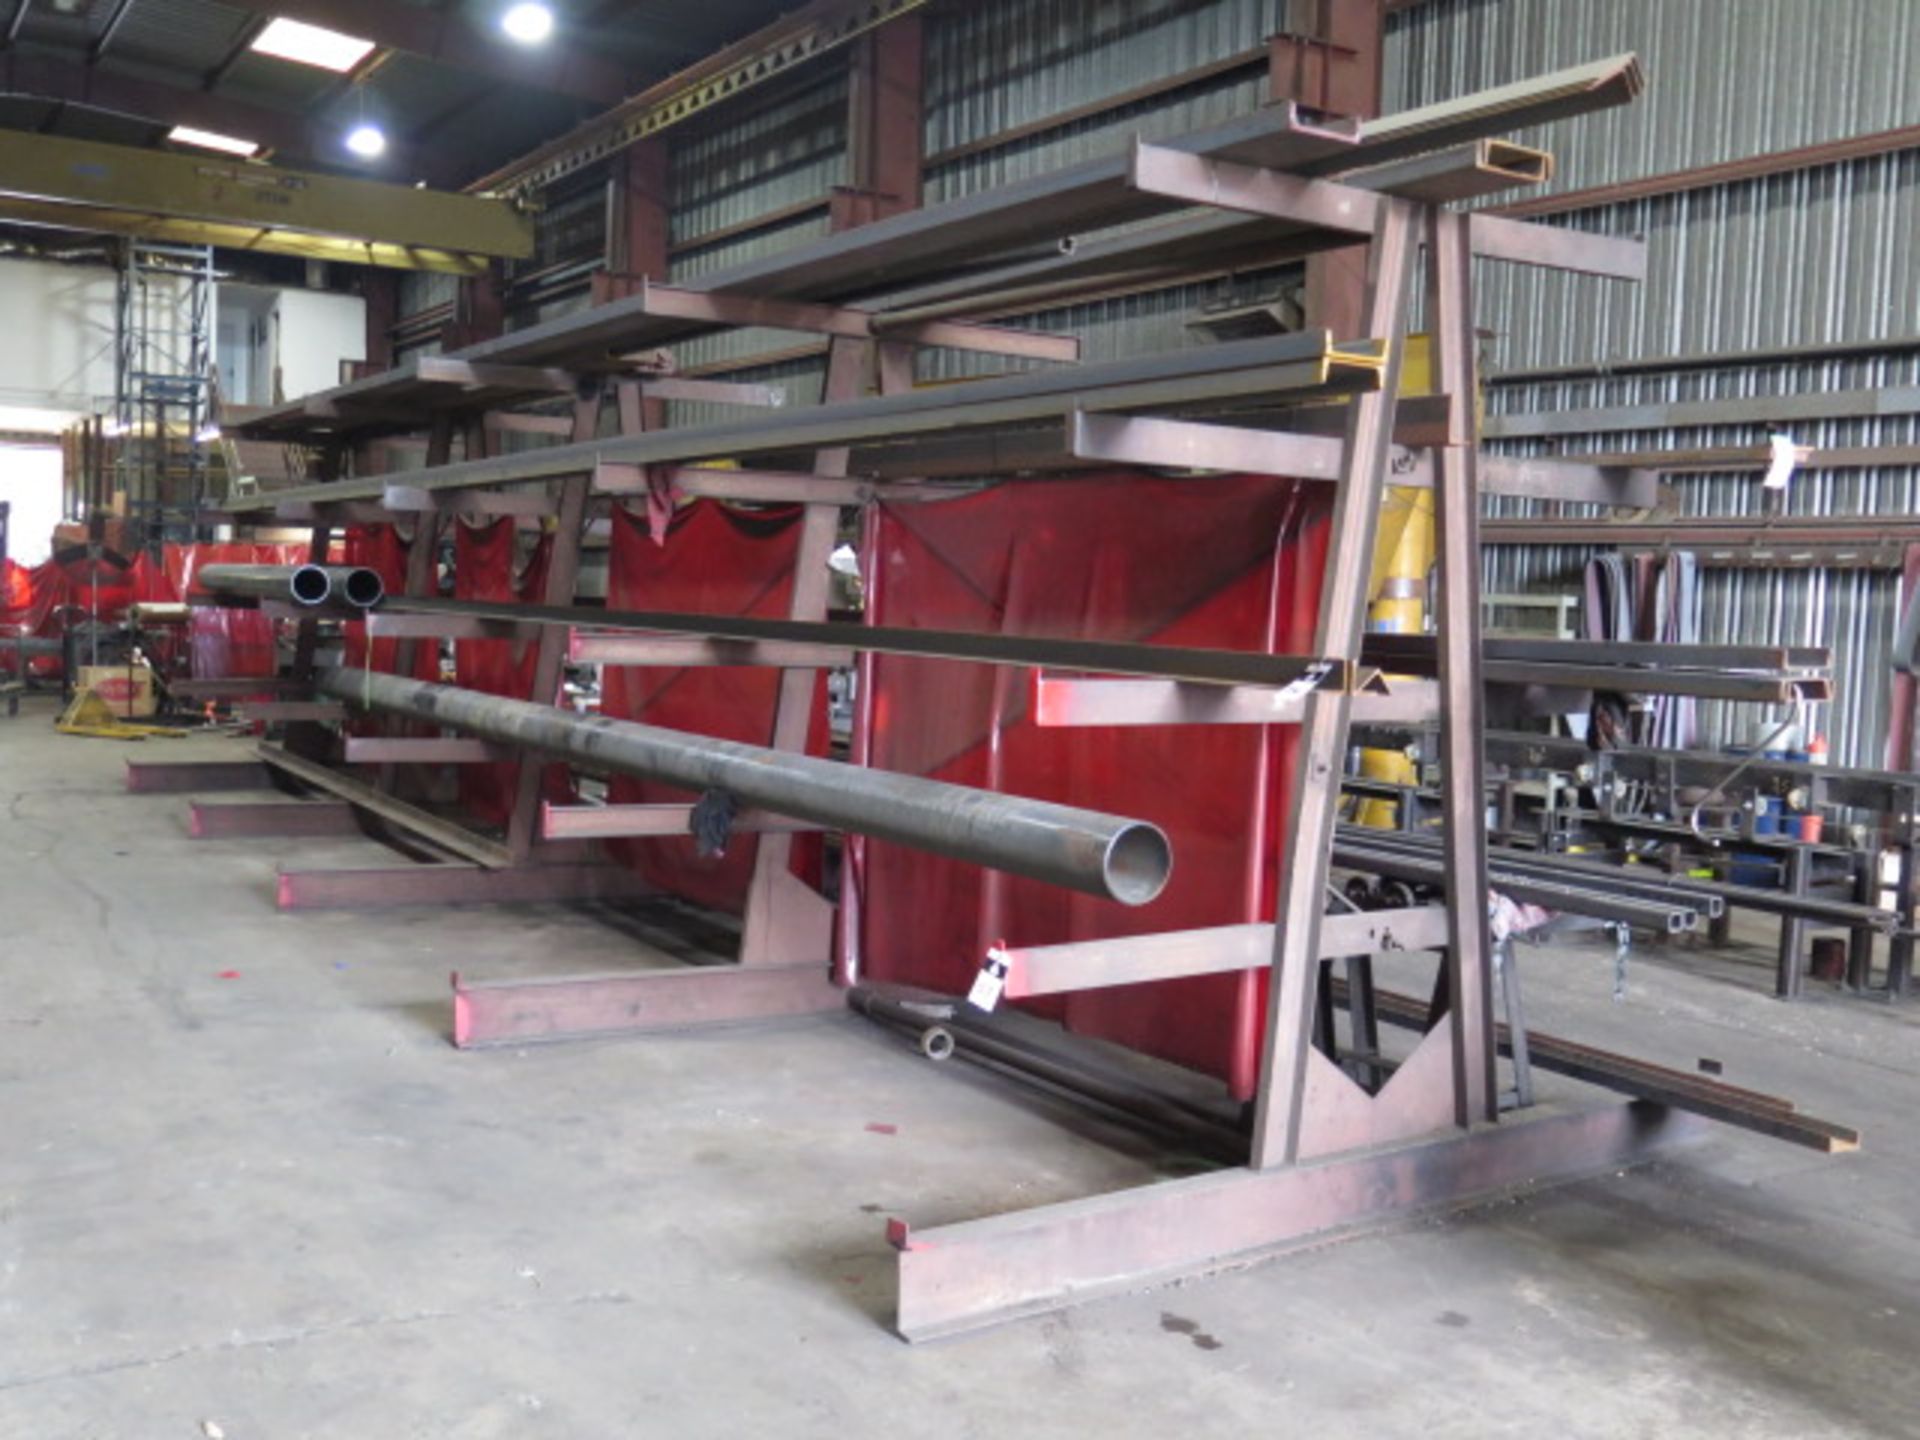 2-Sided Cantilever Material Rack (SOLD AS-IS - NO WARRANTY)